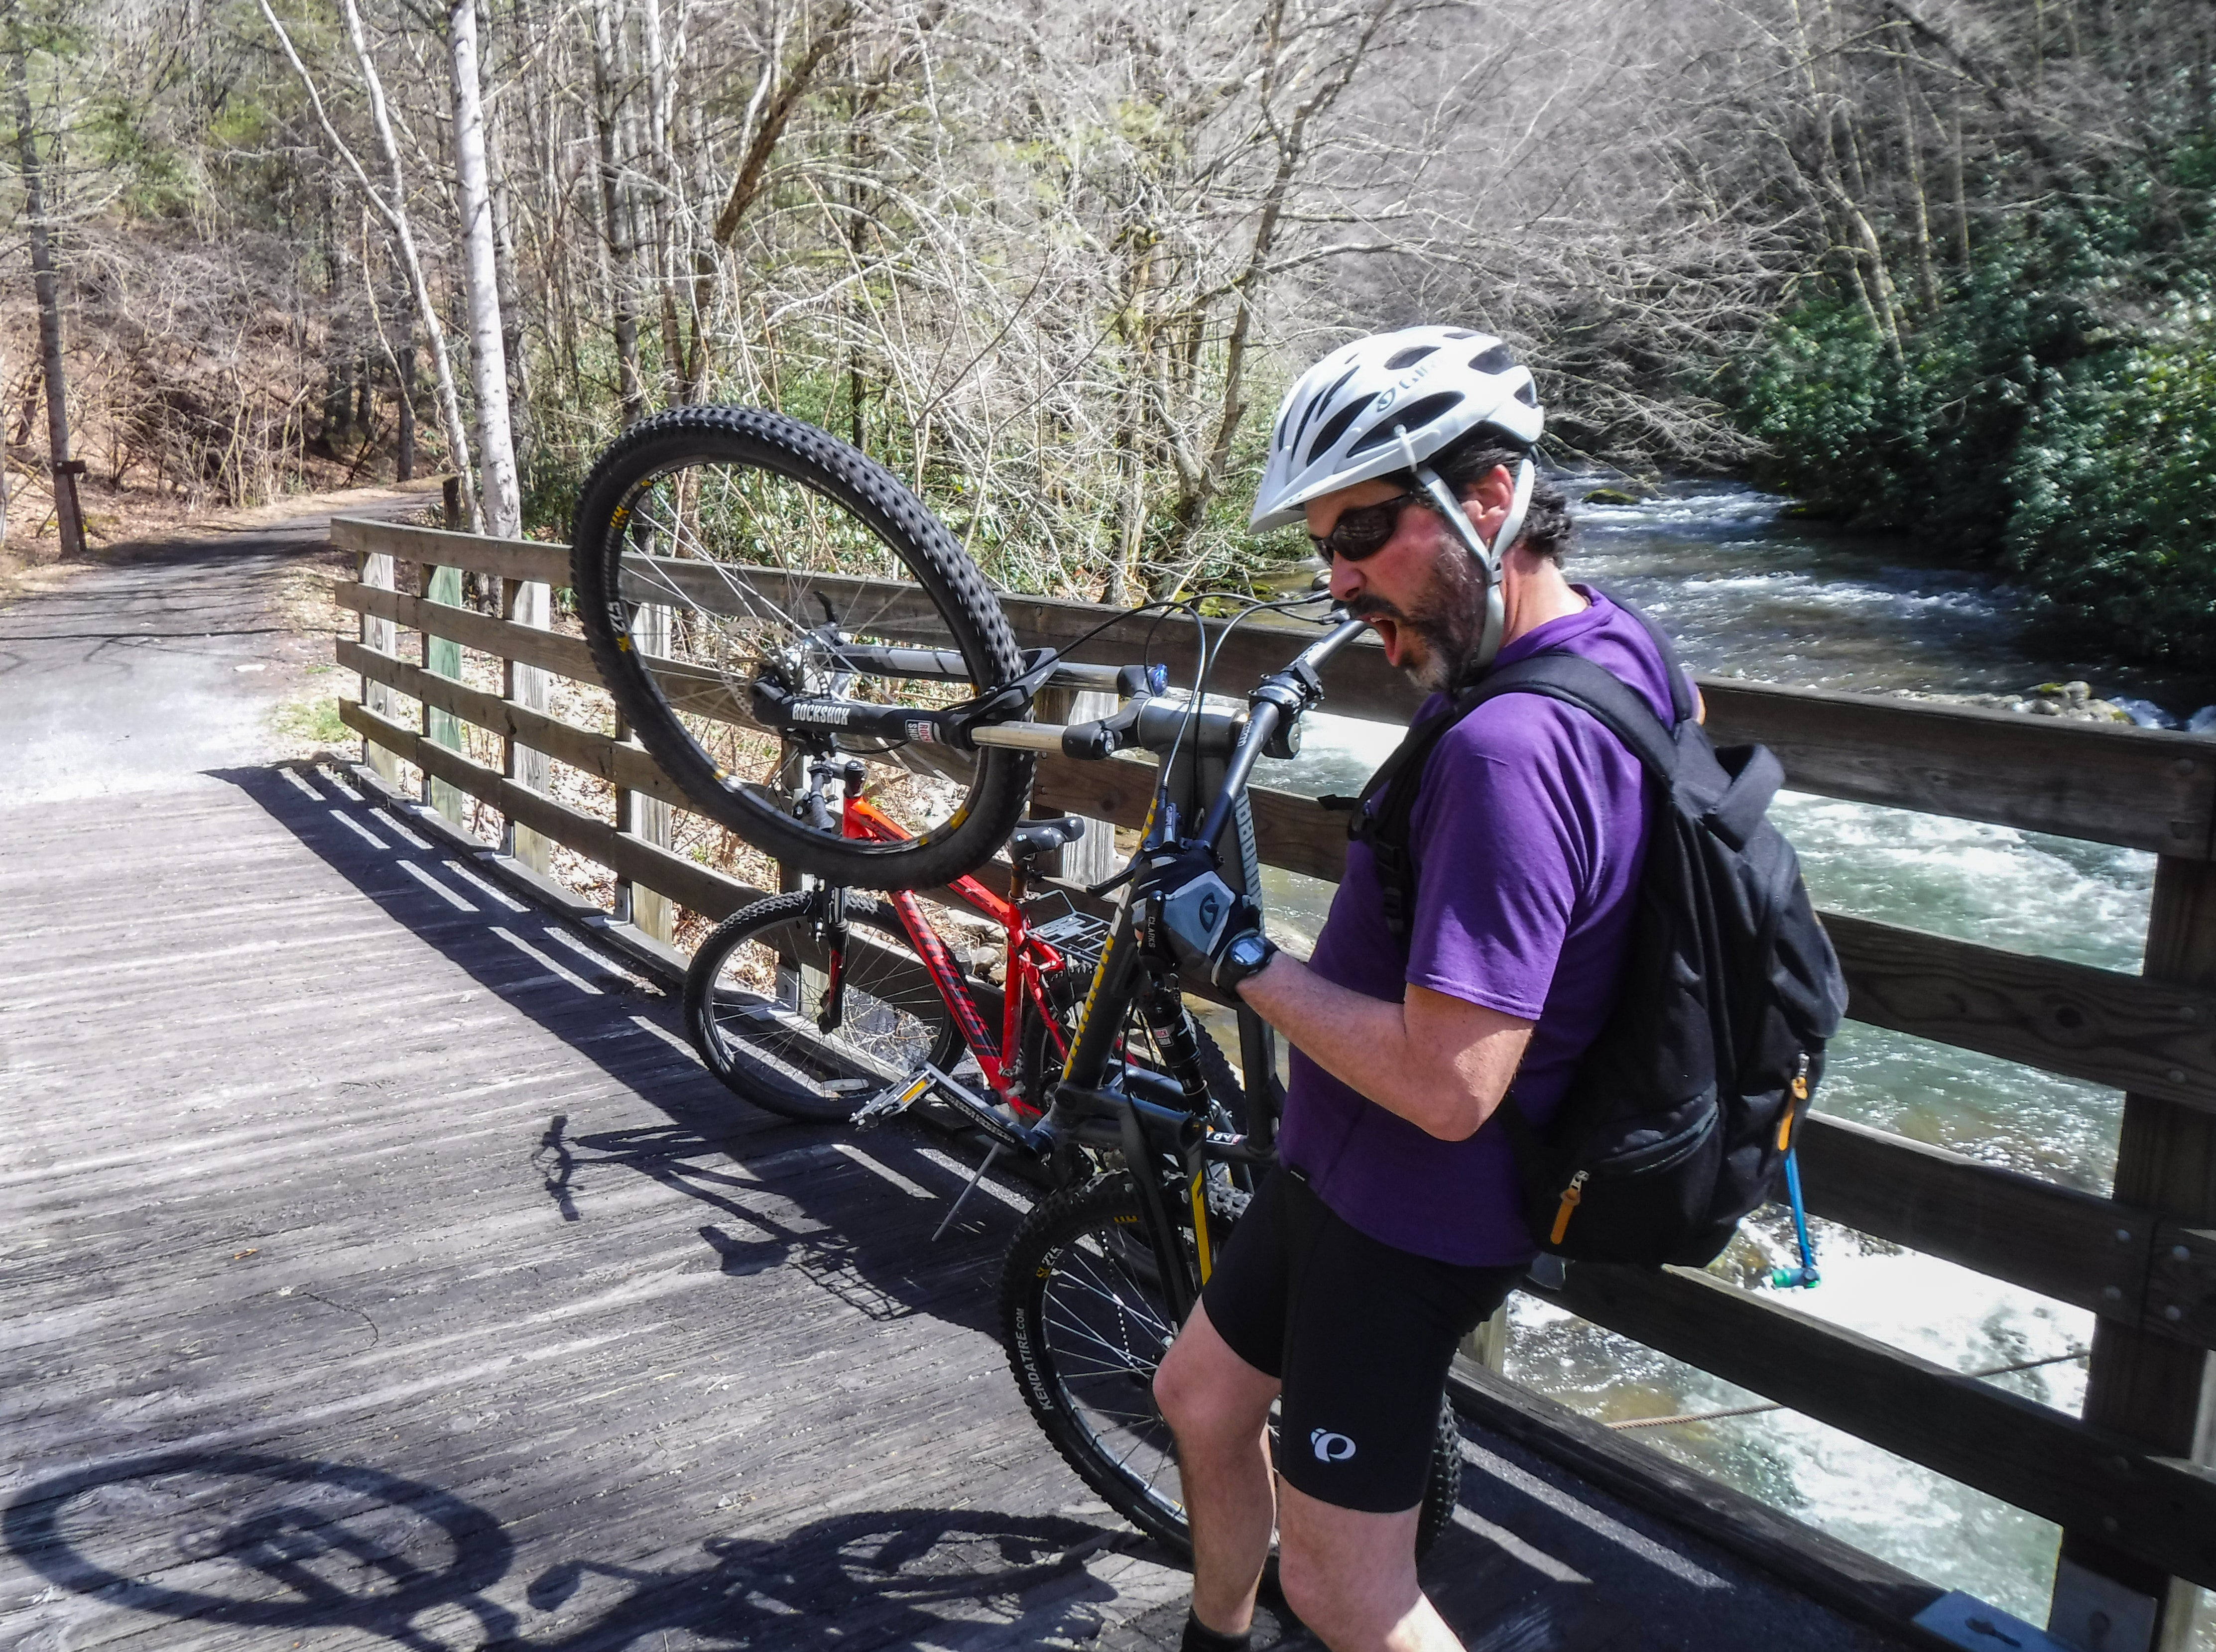 Bike dancing on the Virginia Creeper Trail.  Betcha didn't know that was a thing?